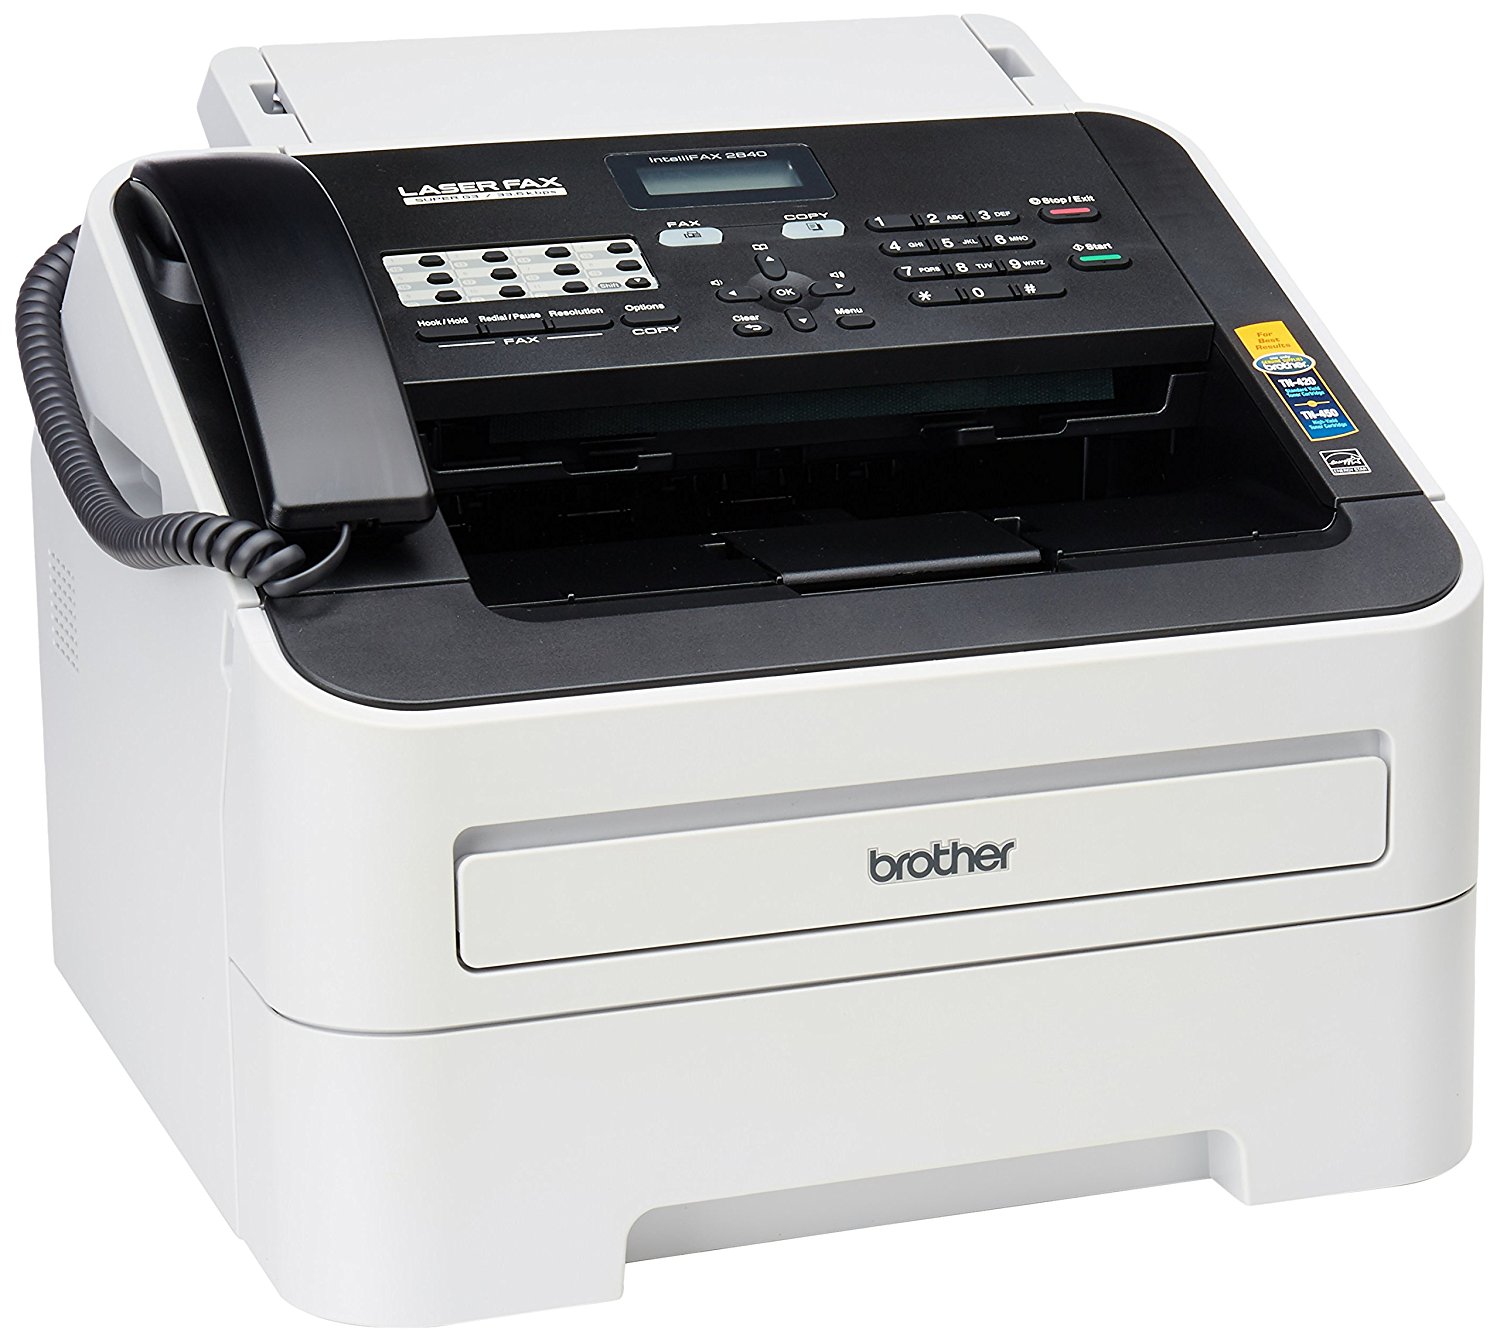 Brother Printer Brother FAX-2840 High Speed Mono Laser Fax Machine